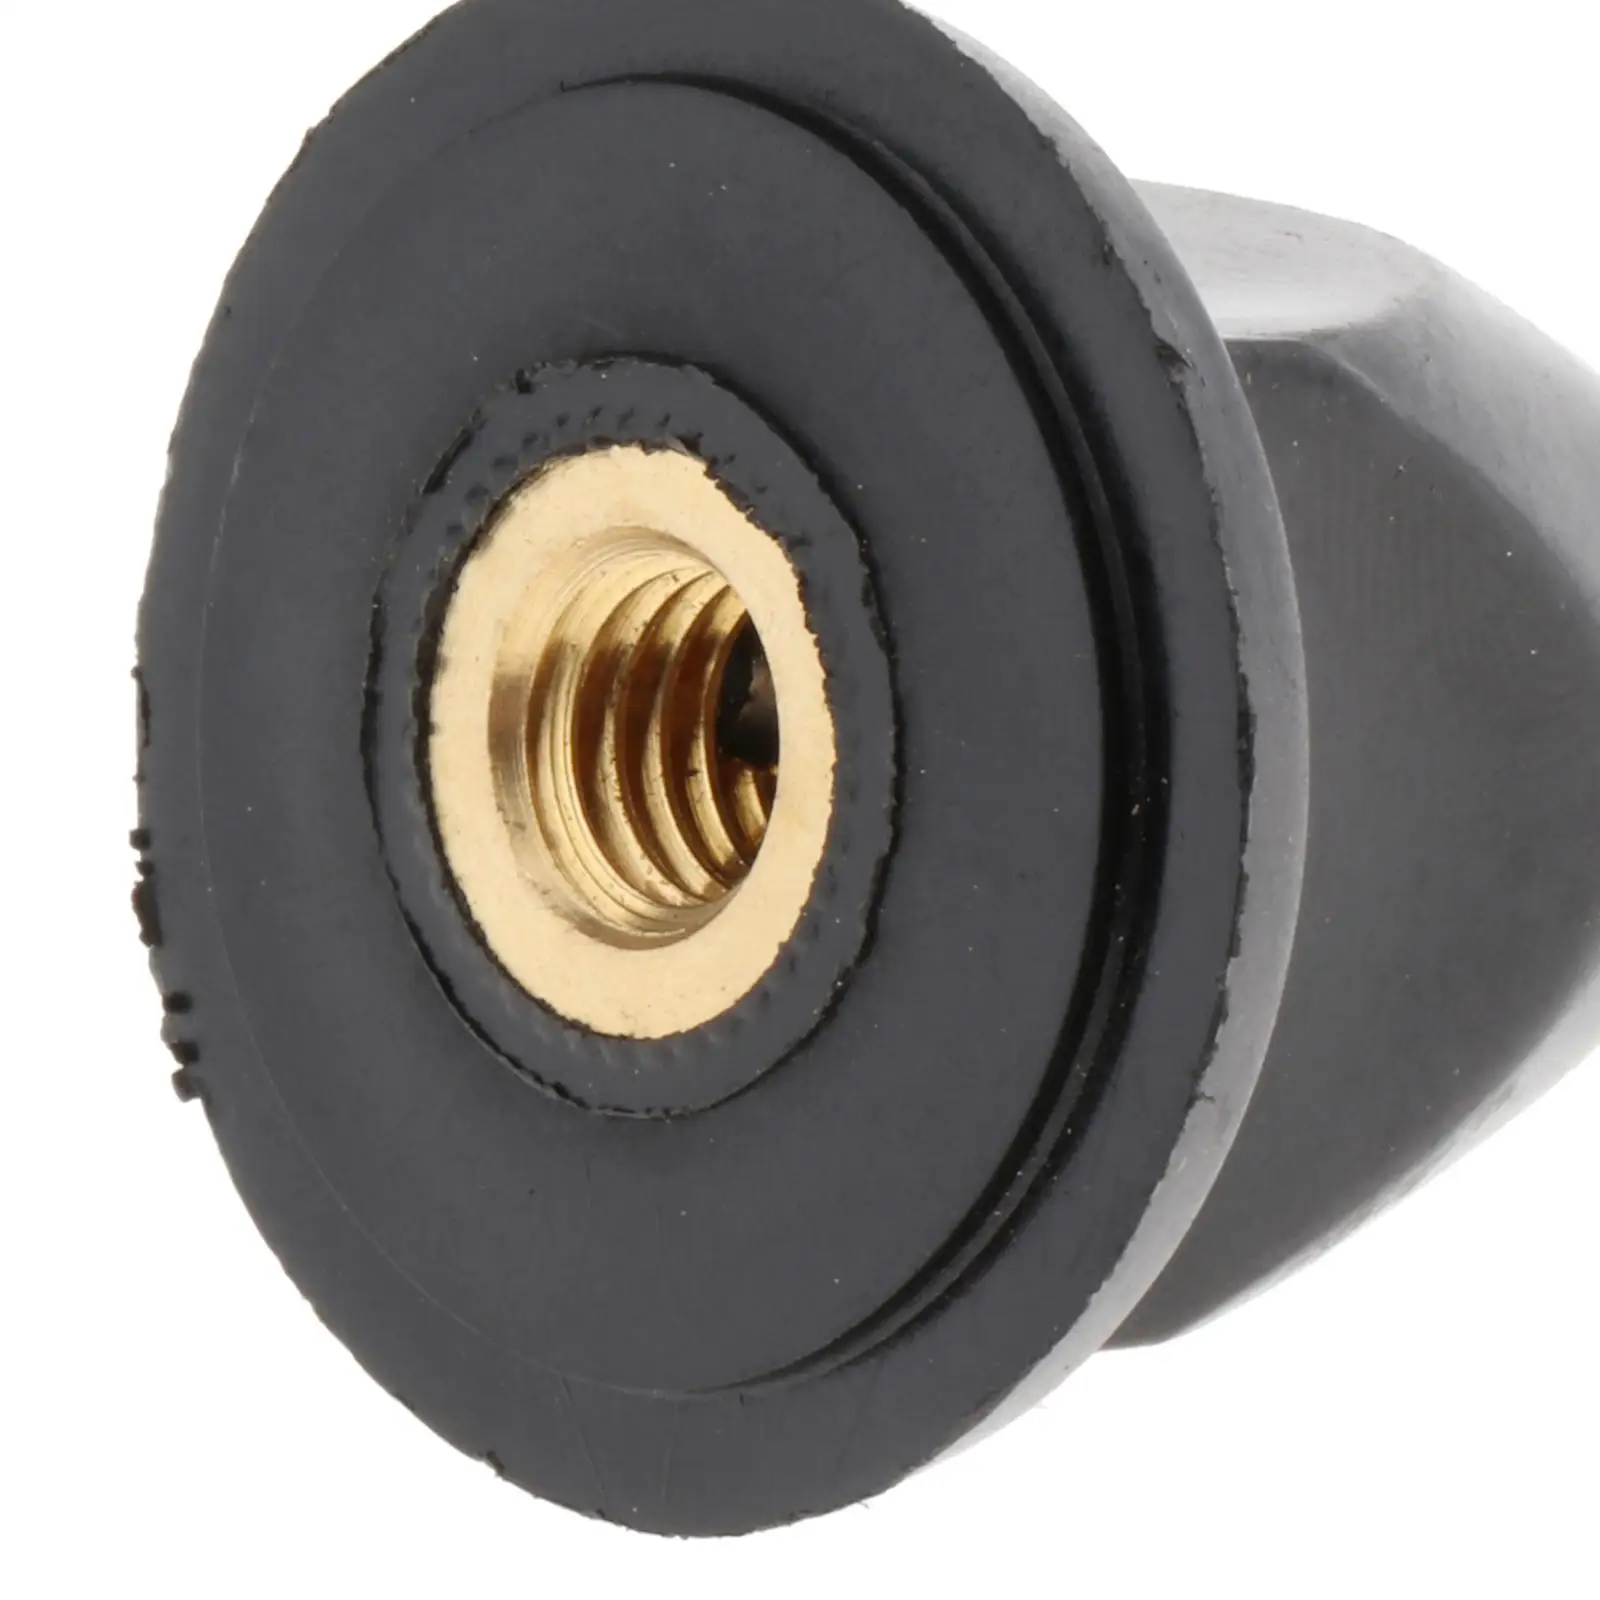 6L5-45616-00 Propeller Nut Suit for Yamaha Outboard Motor 3HP 5HP Parts